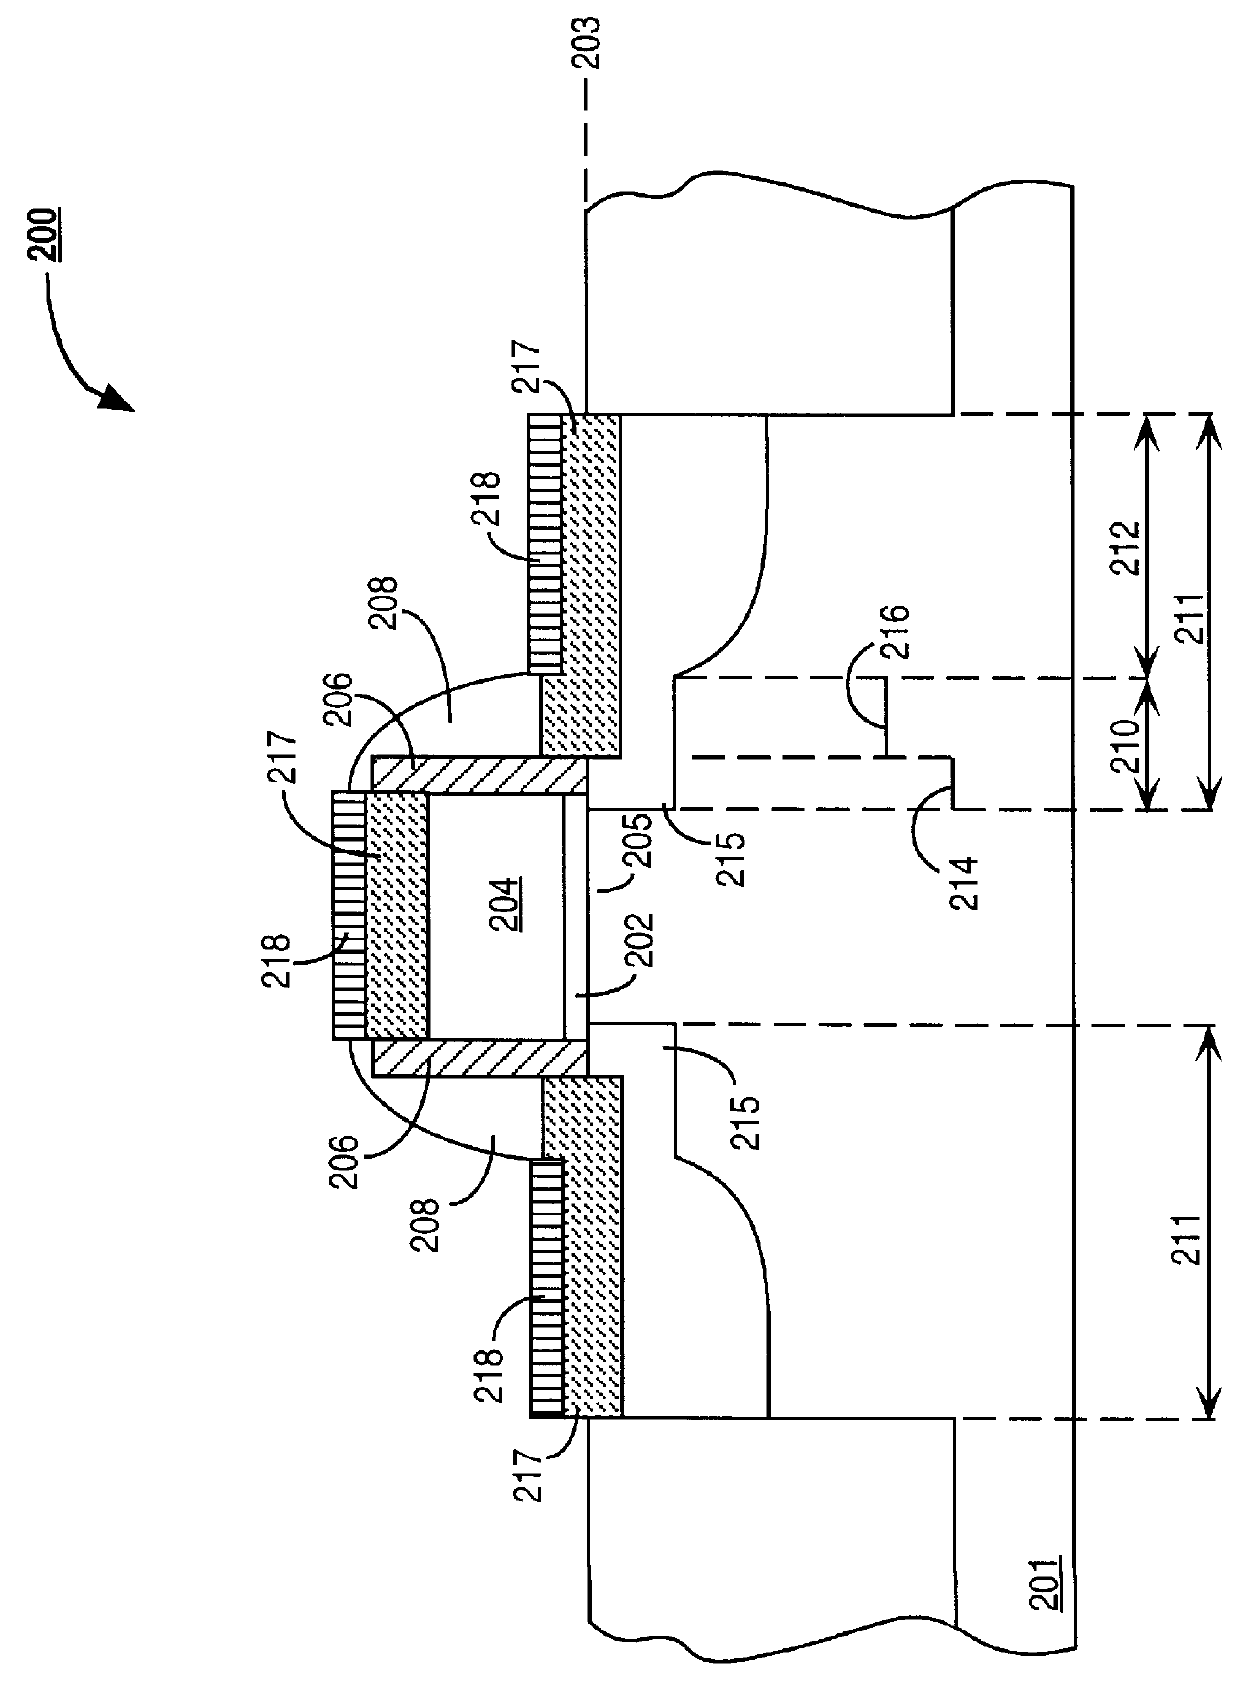 Method of fabricating a MOS transistor with a raised source/drain extension